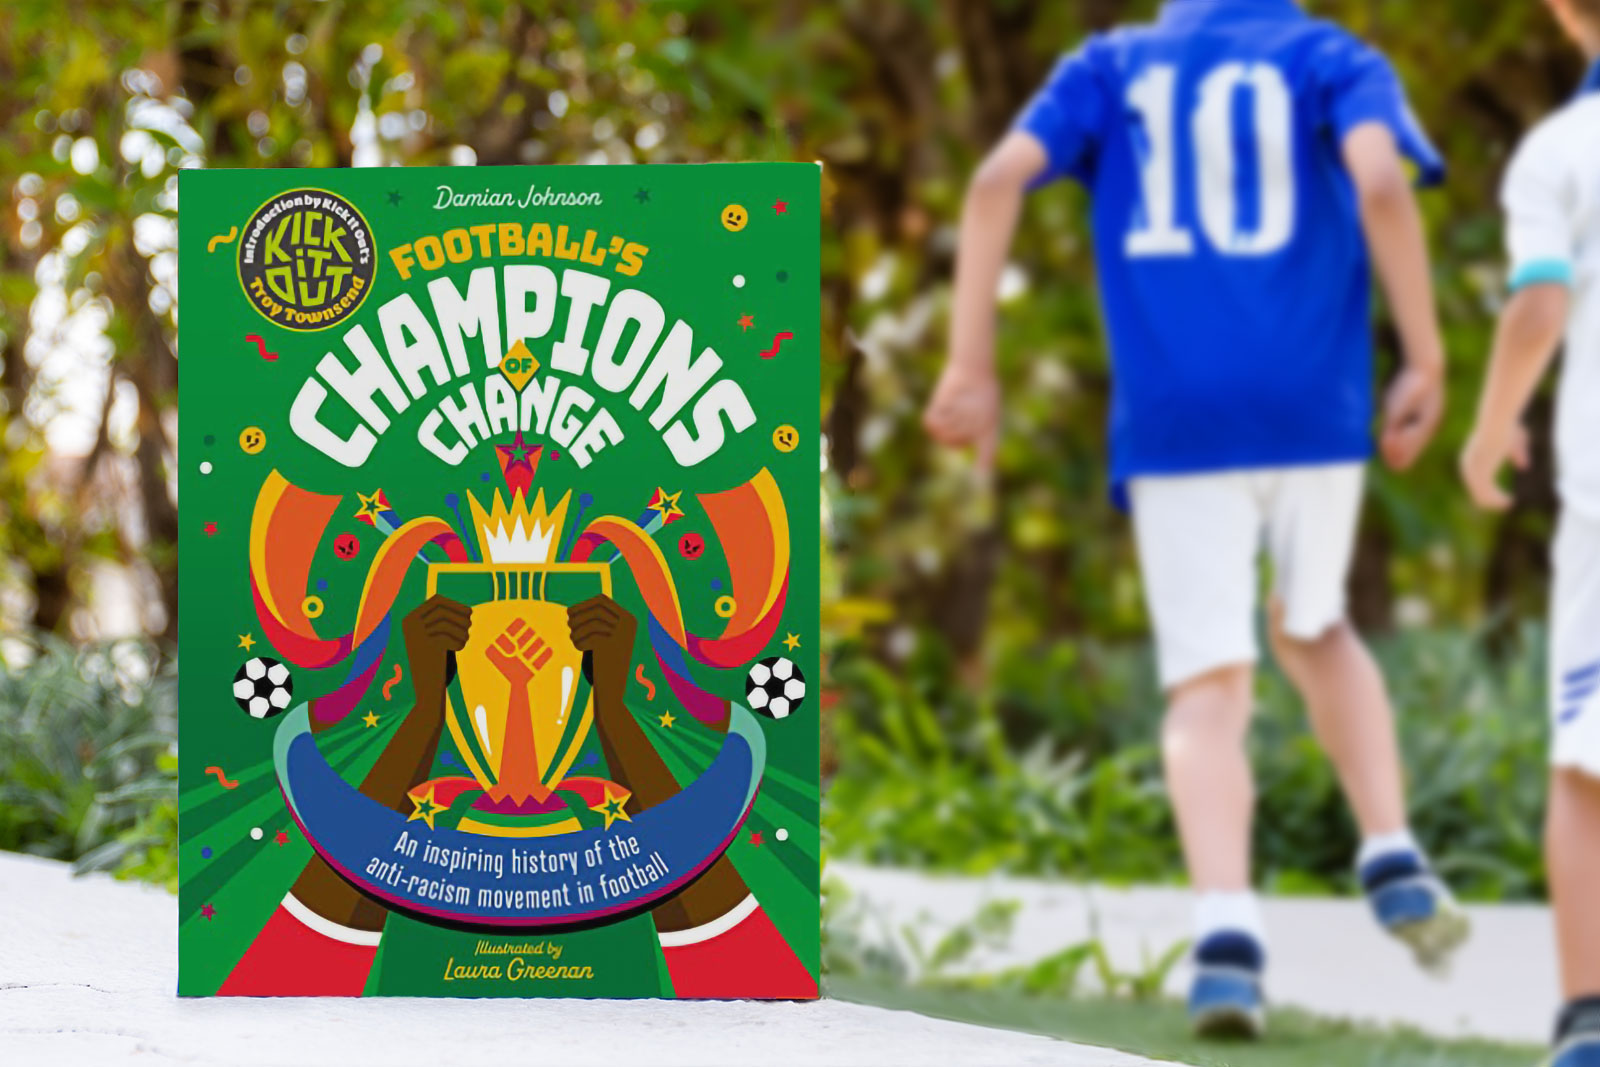 Football's Champions of Change by Damian Johnson